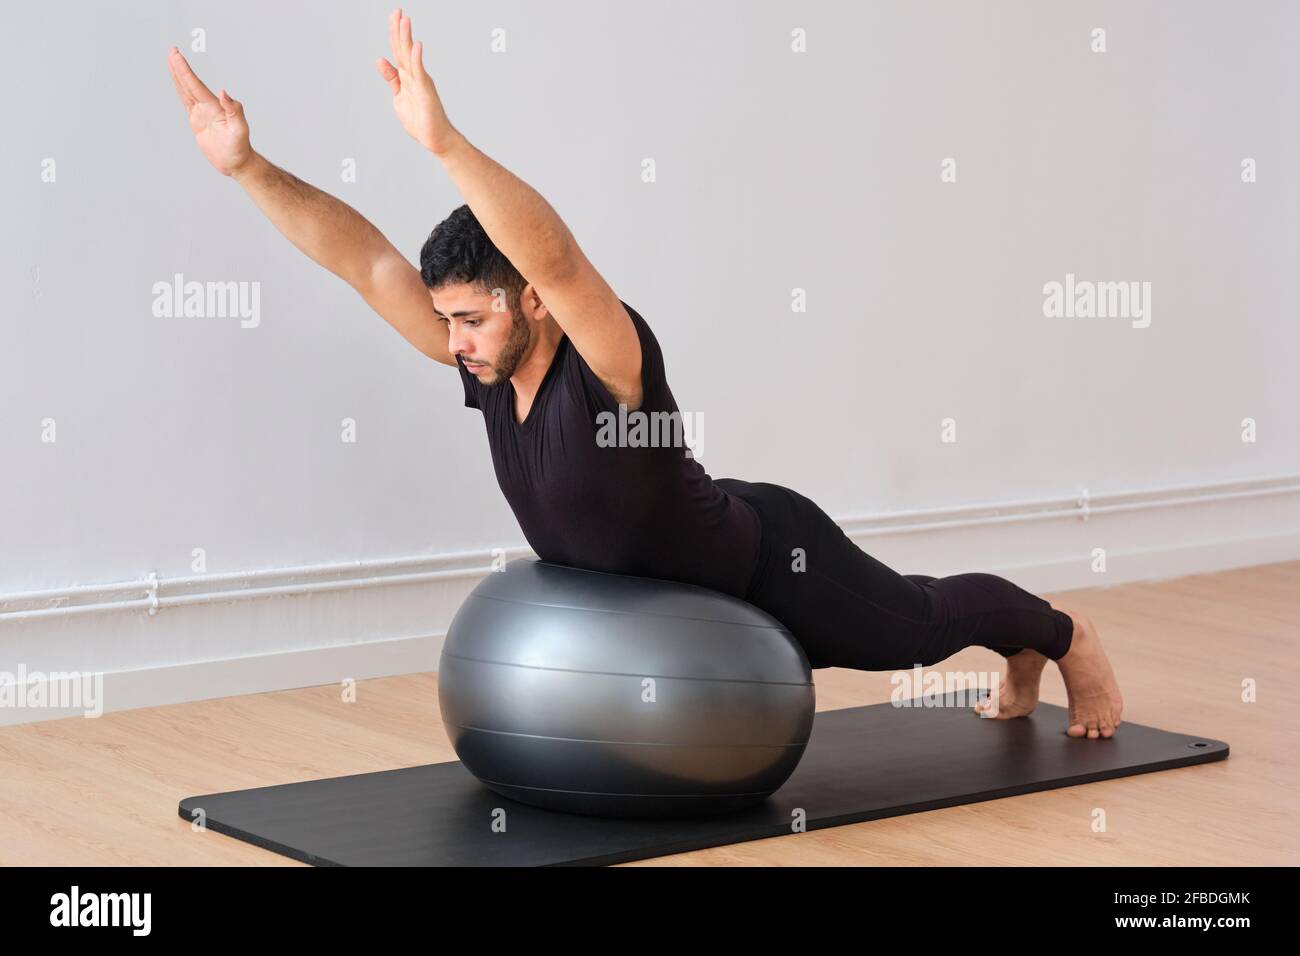 Man practicing pilates on fitness ball in exercise room Stock Photo